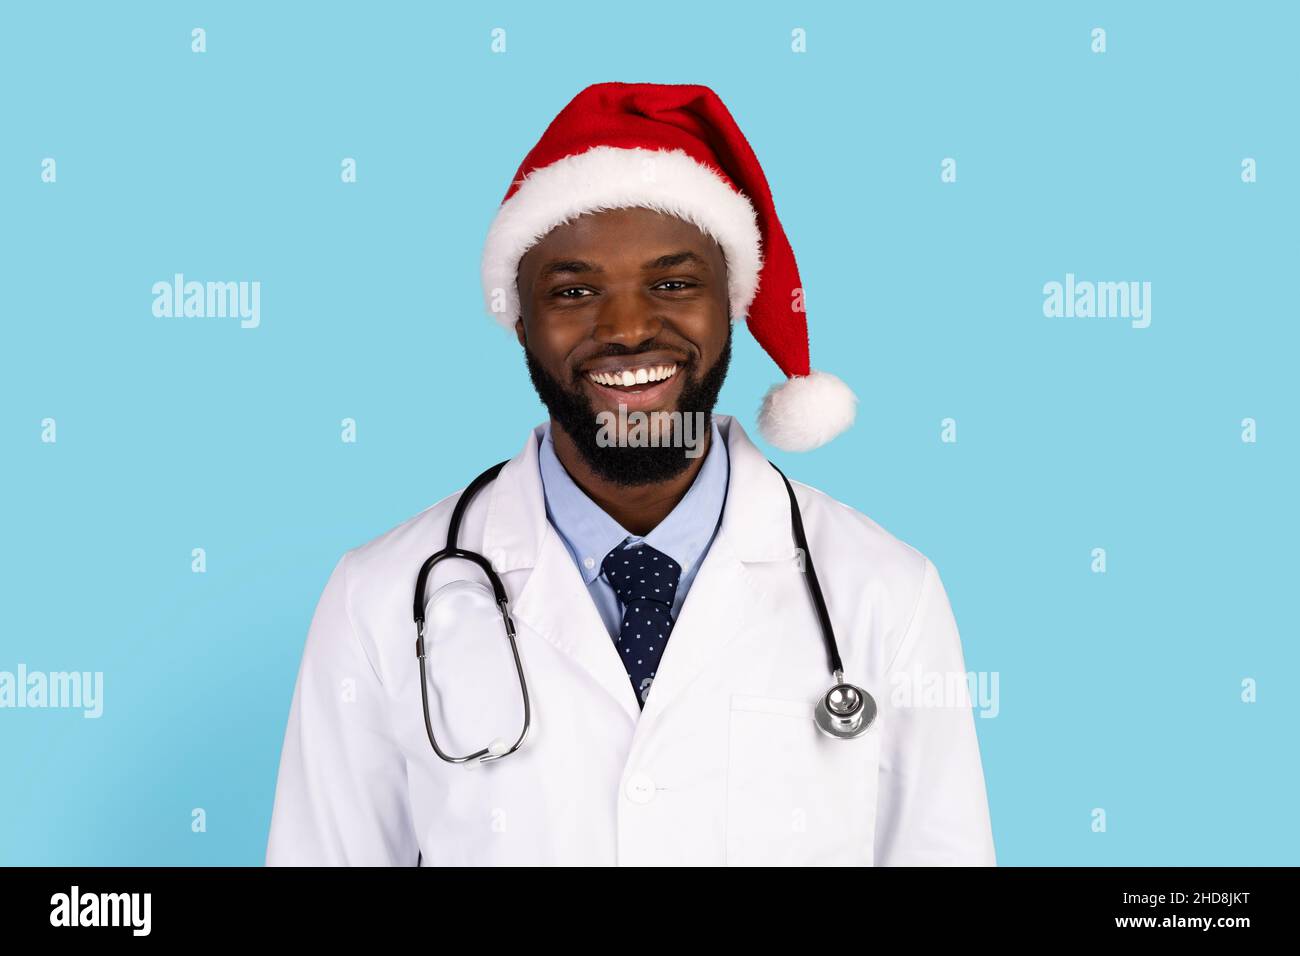 Handsome black doctor in uniform and Santa hat posing over blue background Stock Photo